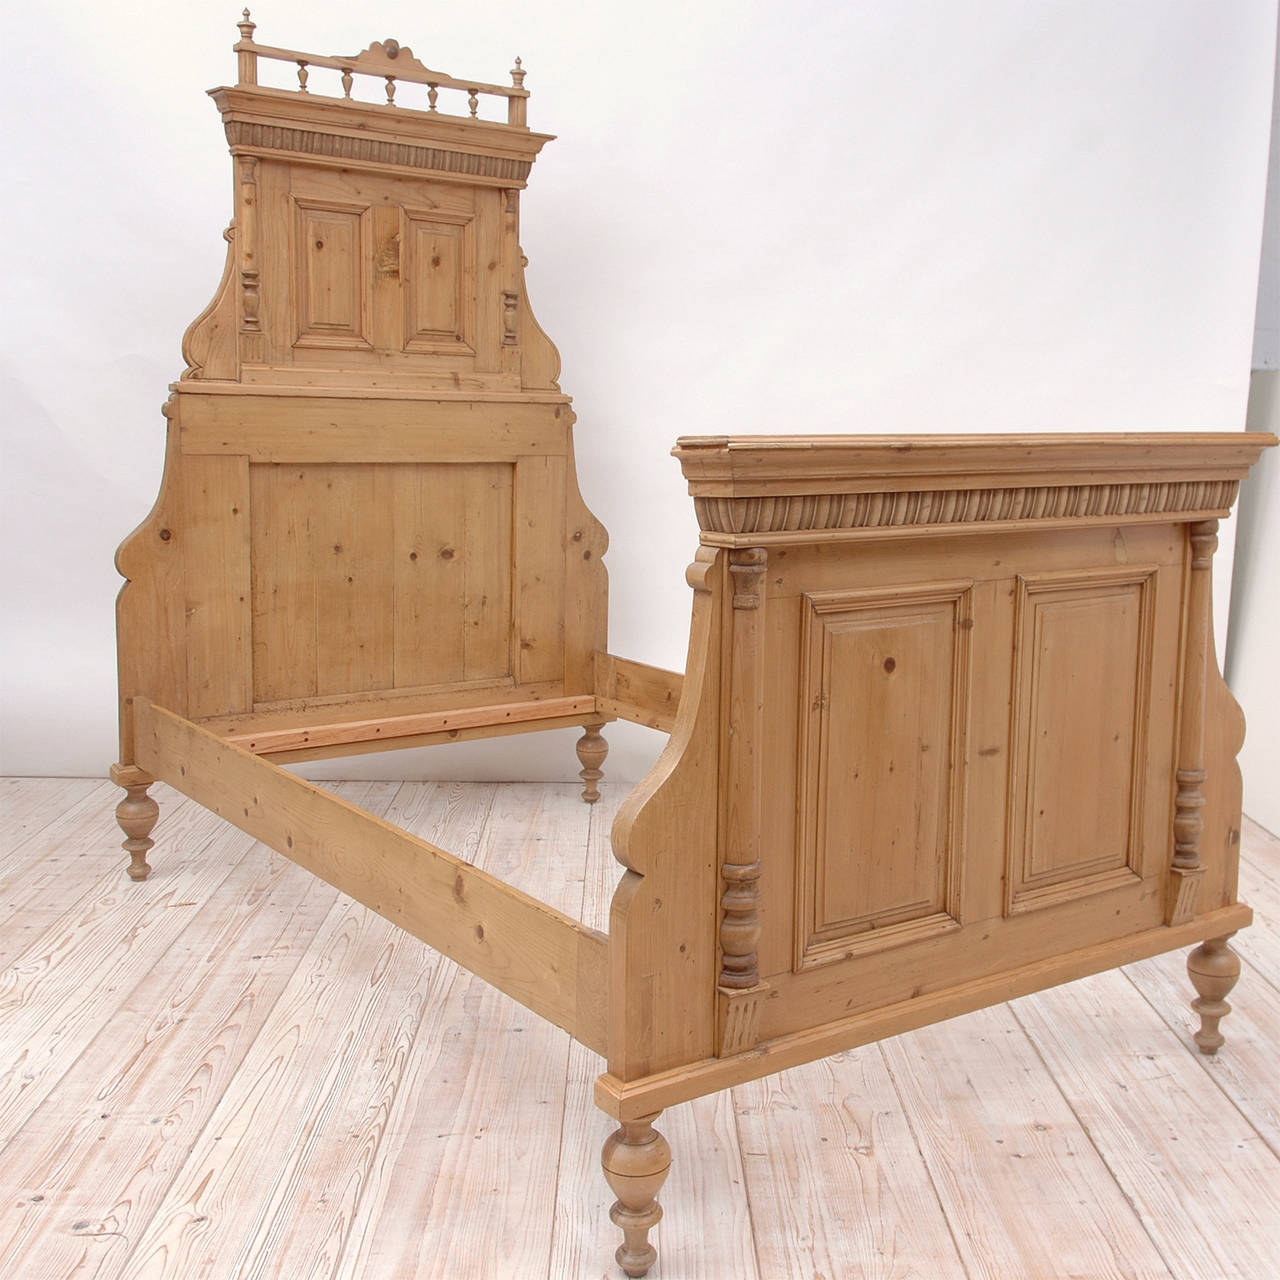 From the Austria-Hungarian Empire, an exceptional pair of beds in pine with elaborate embellishments, featuring recessed panels with moldings that are flanked by pilasters on the foot boards and carved bonnets with galleries above the paneled